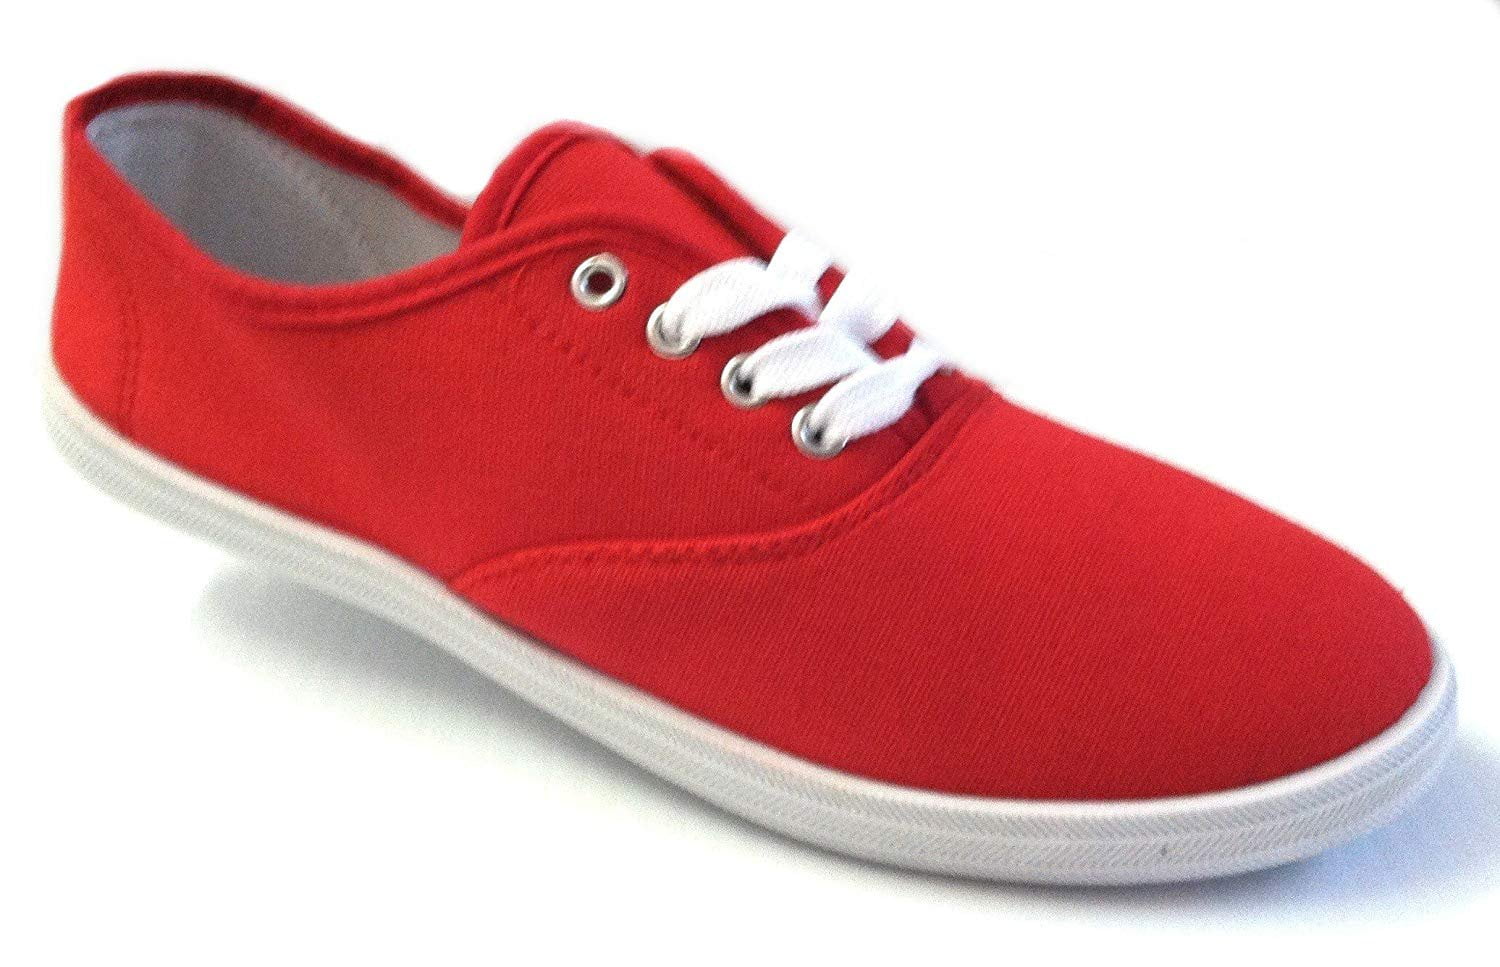 Deter once Descent Shoes 18 Womens Canvas Shoes Lace up Sneakers 18 Colors Available 7.5 BM  US, Red 324 - Walmart.com